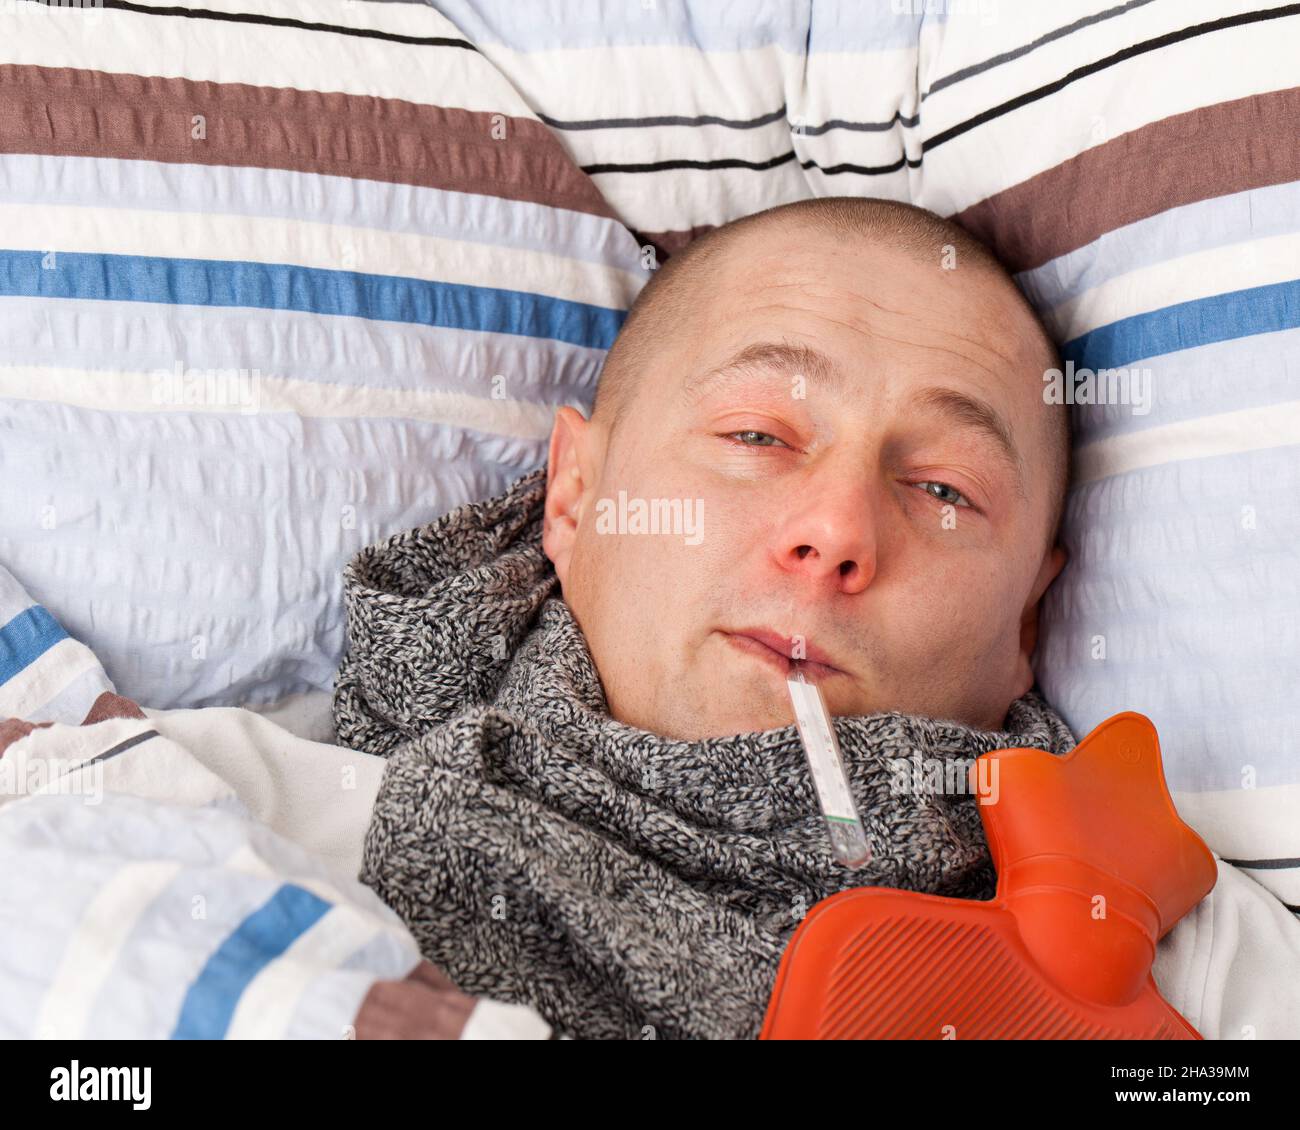 Sick man with a hot water bottle and thermometer sickness, flu, colds, person, human, red, nose, cold, lying, sick, slee Stock Photo